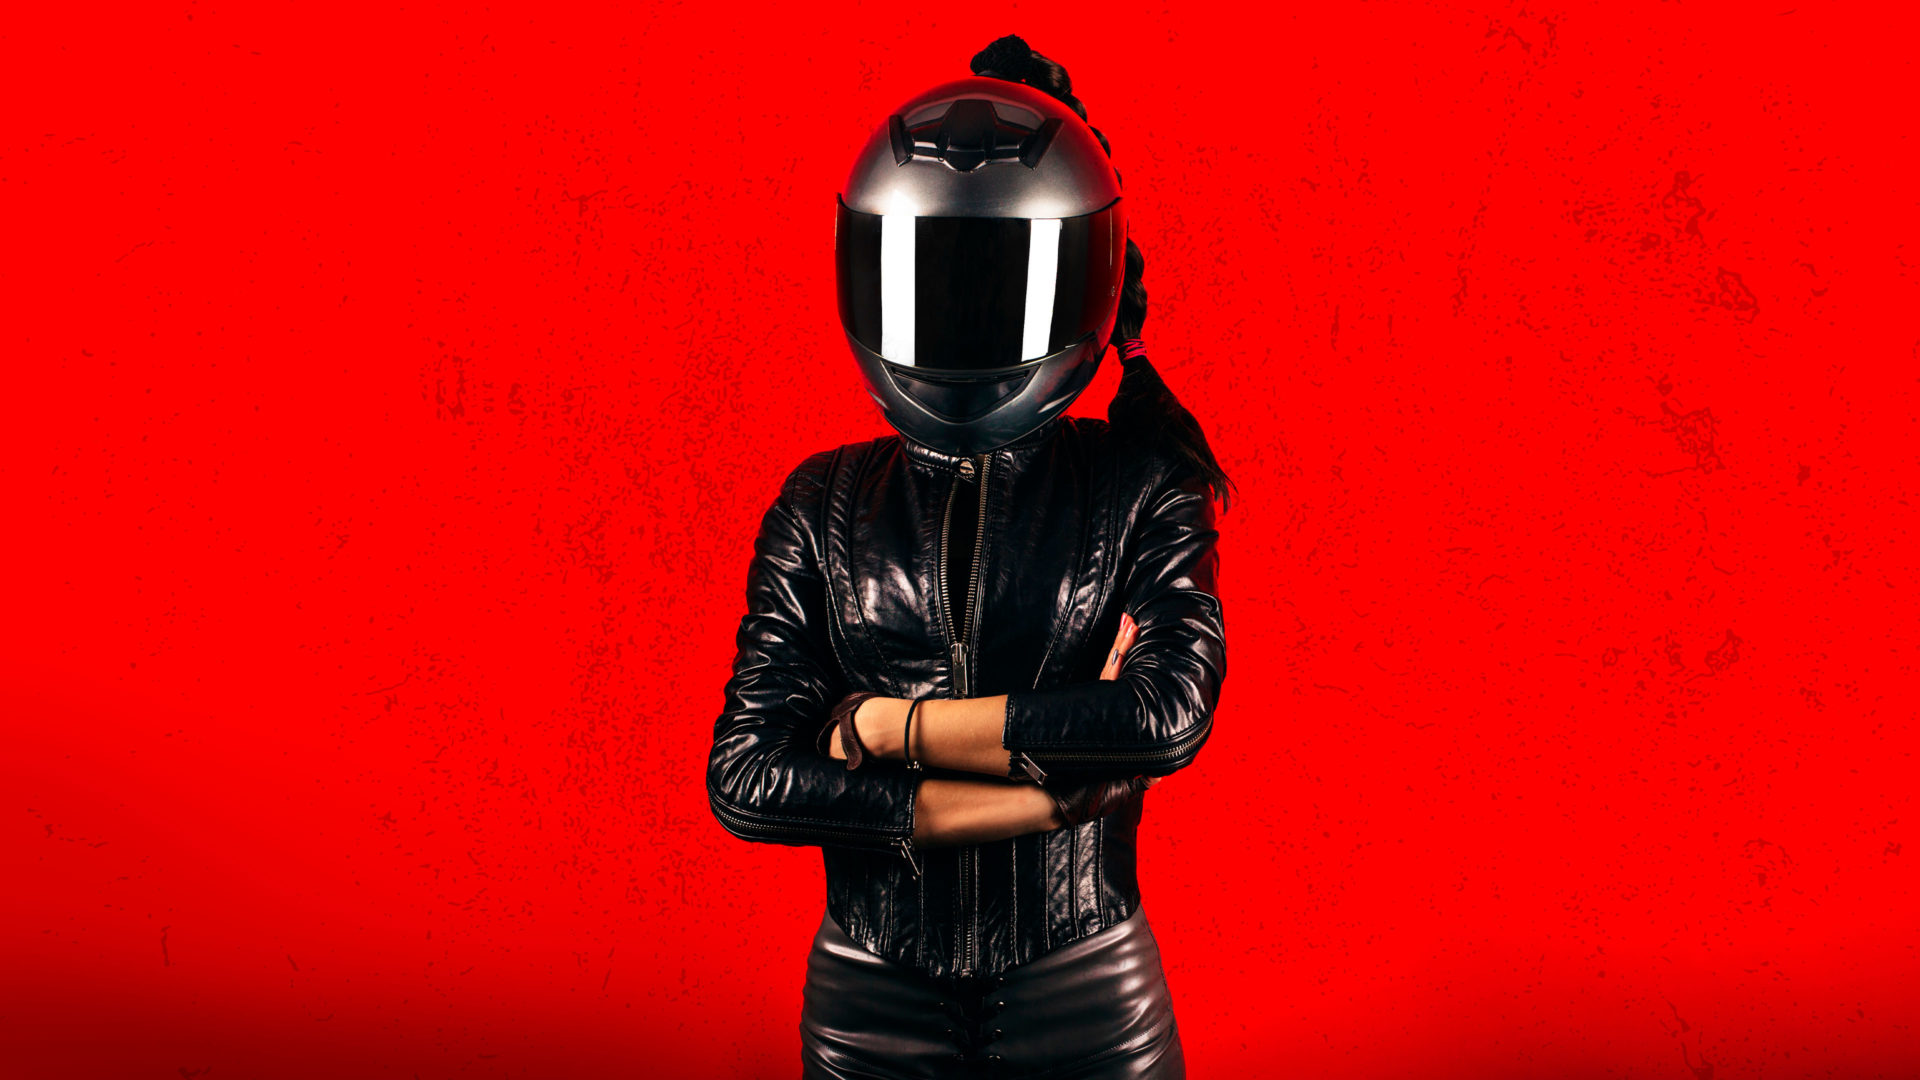 A film poster depicting a leather-clad woman biker standing with arms akimbo.